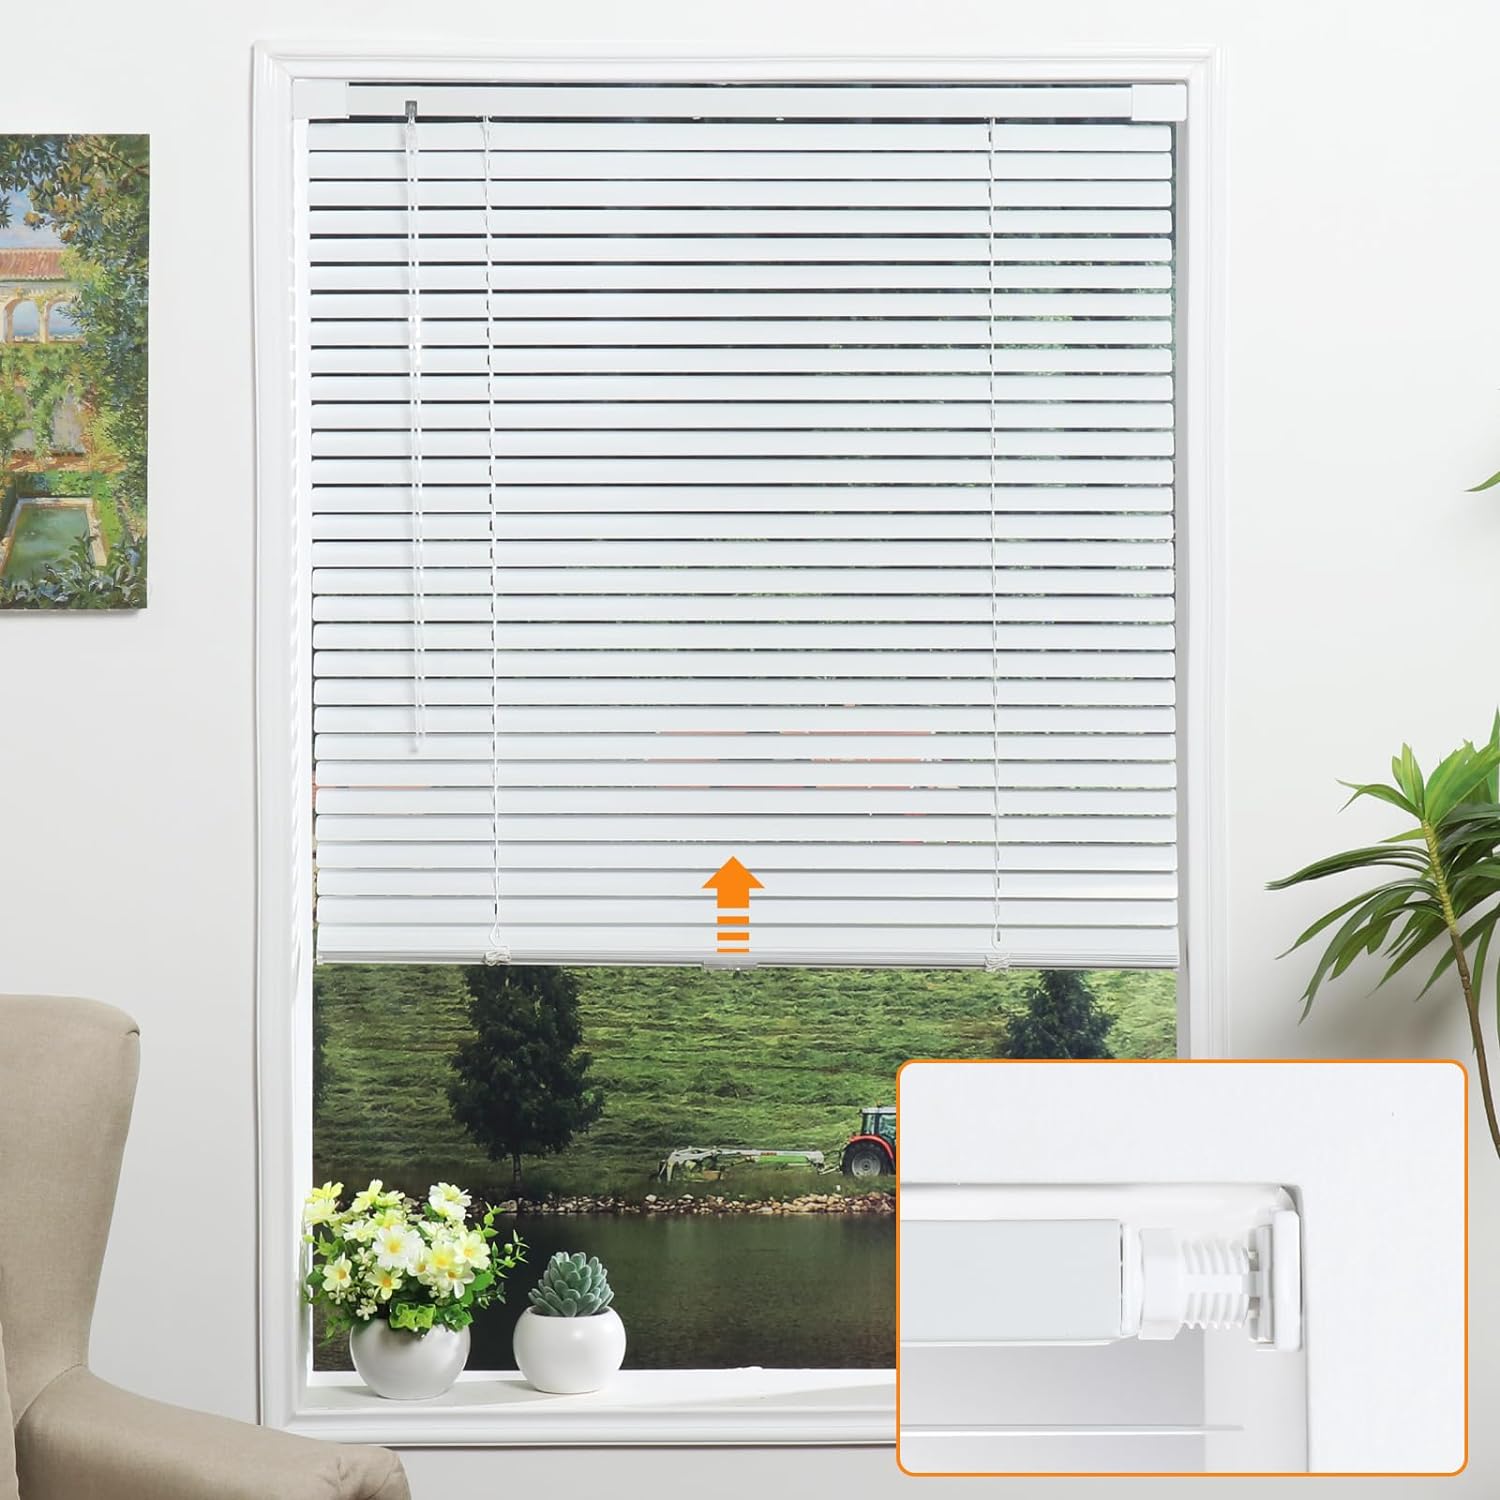 LUCKUP No Tools-No Drill 1" Aluminum Horizontal Mini Blinds Shades for Window, Light Filtering Inside Installation, White, 31" W x 64" L